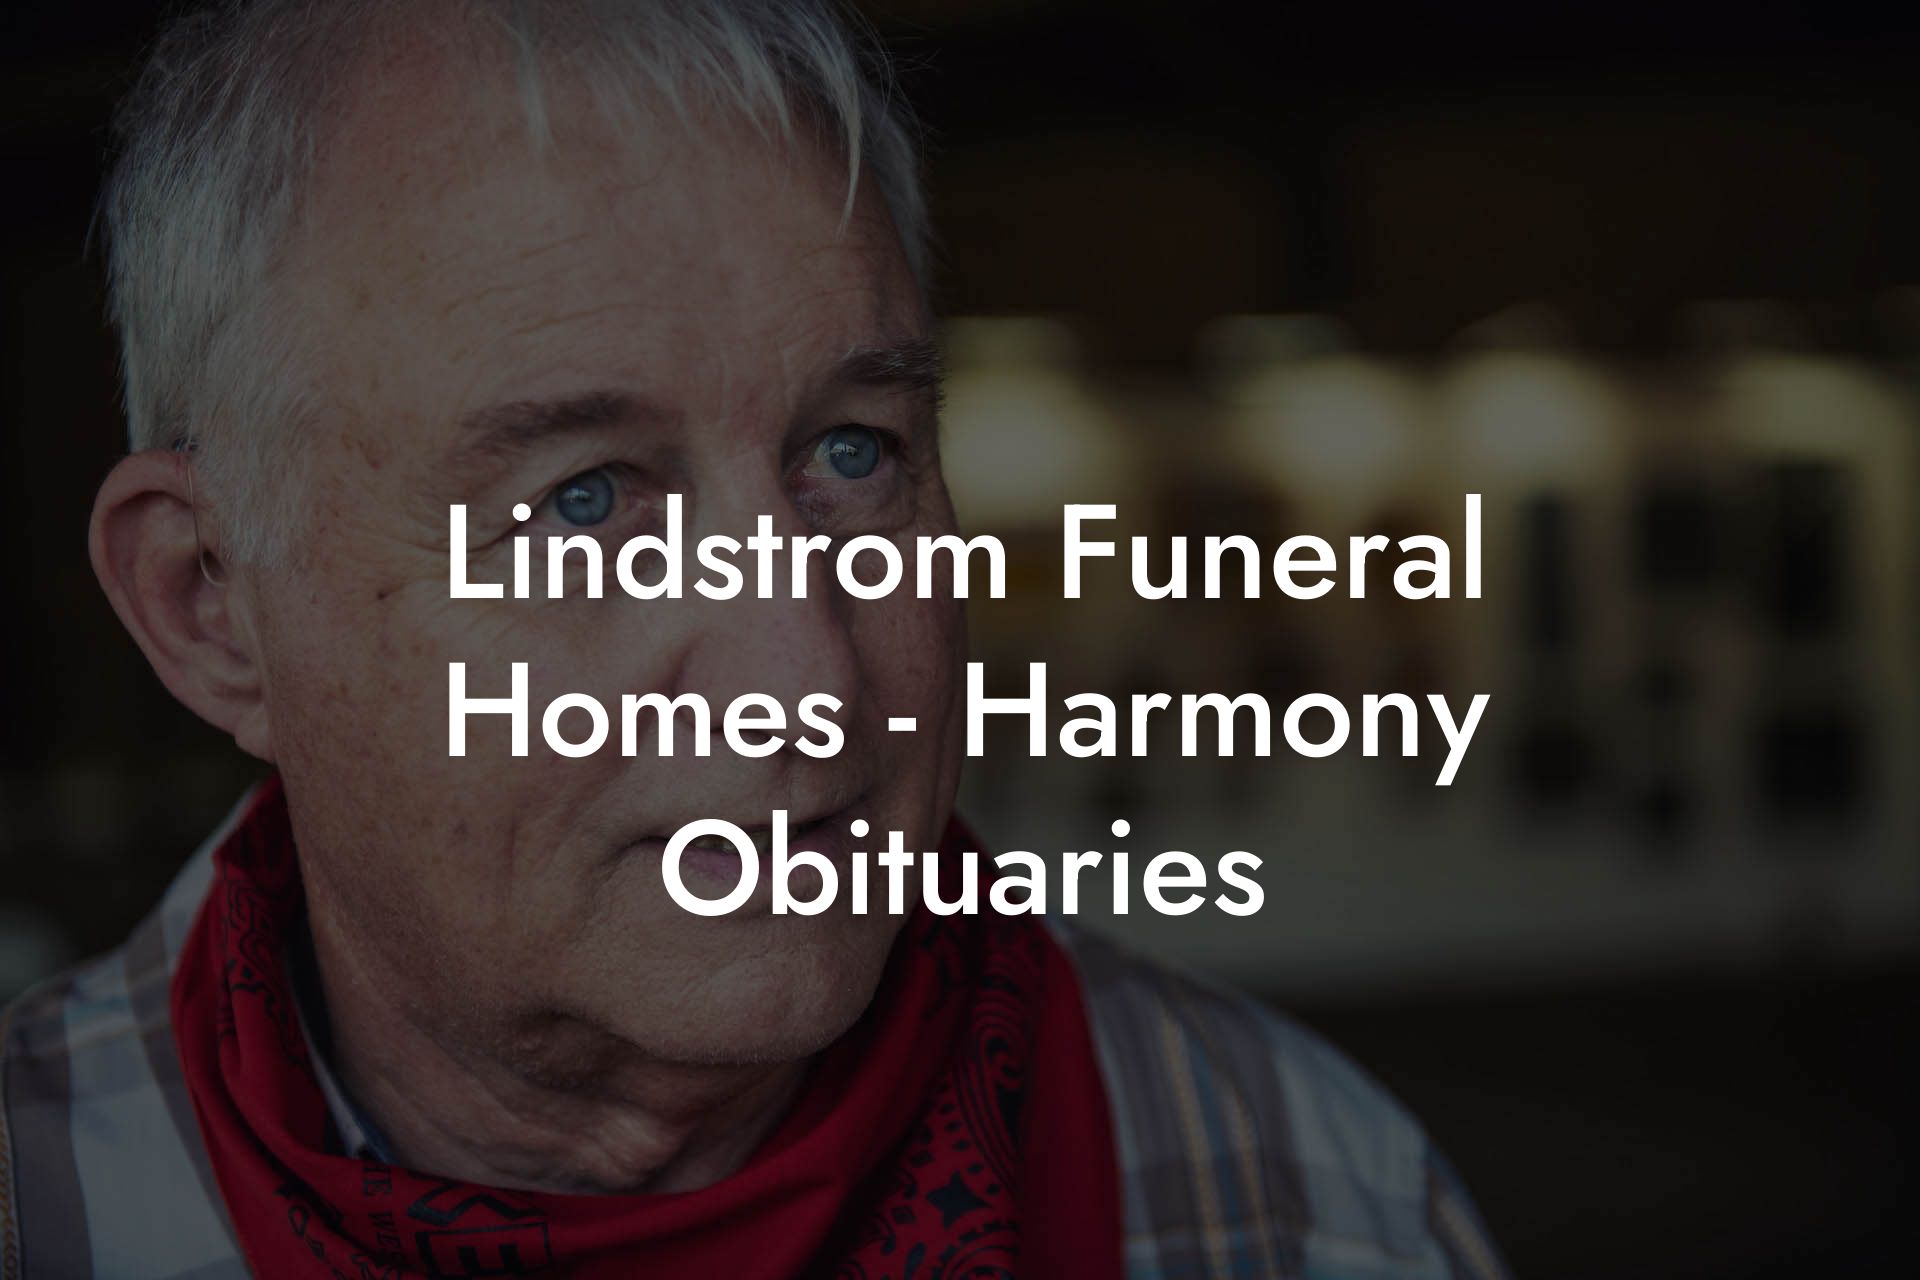 Lindstrom Funeral Homes - Harmony Obituaries